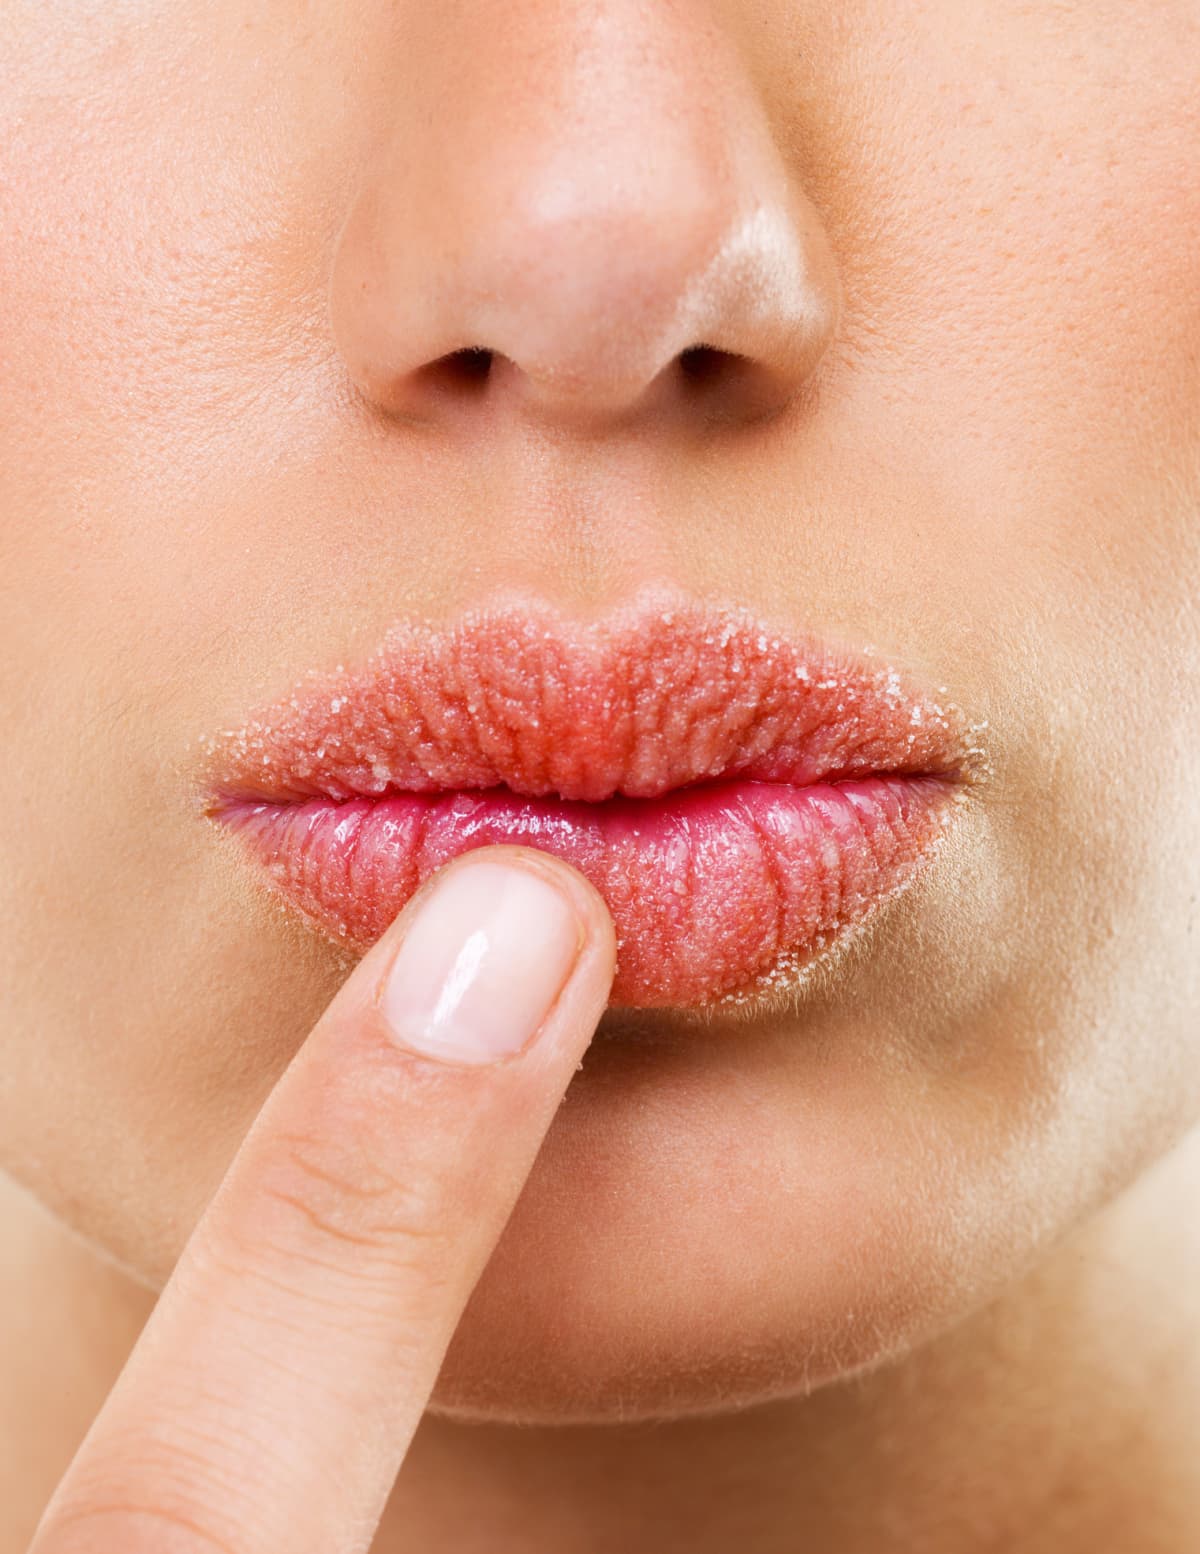 Lips affected by herpes. Treatment with a cotton swab.